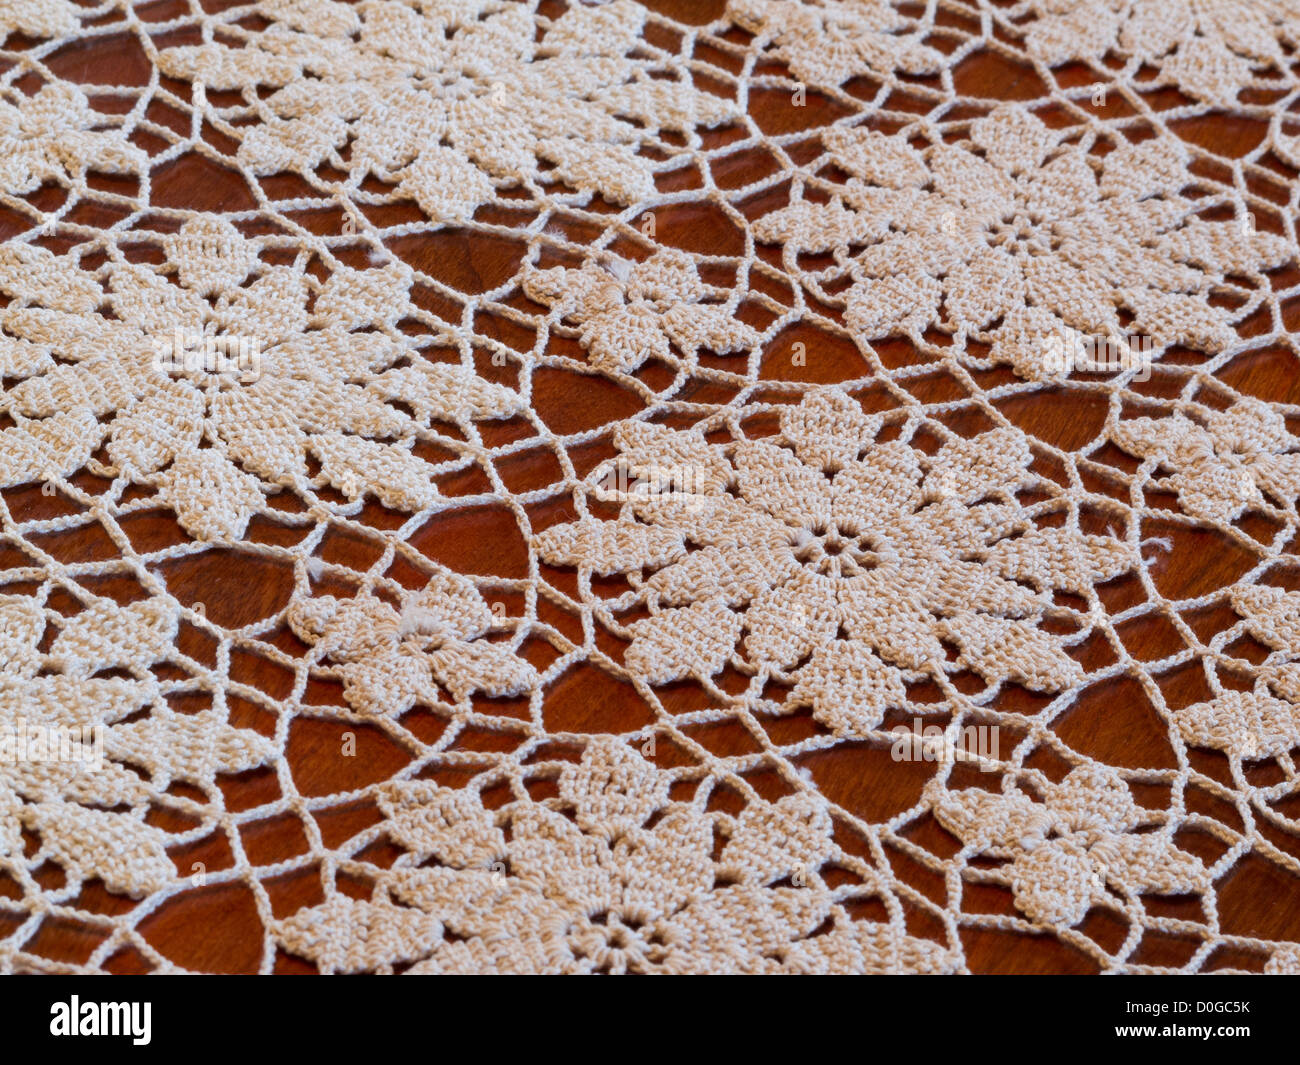 Vintage Handcrafted Lace Stock Photo